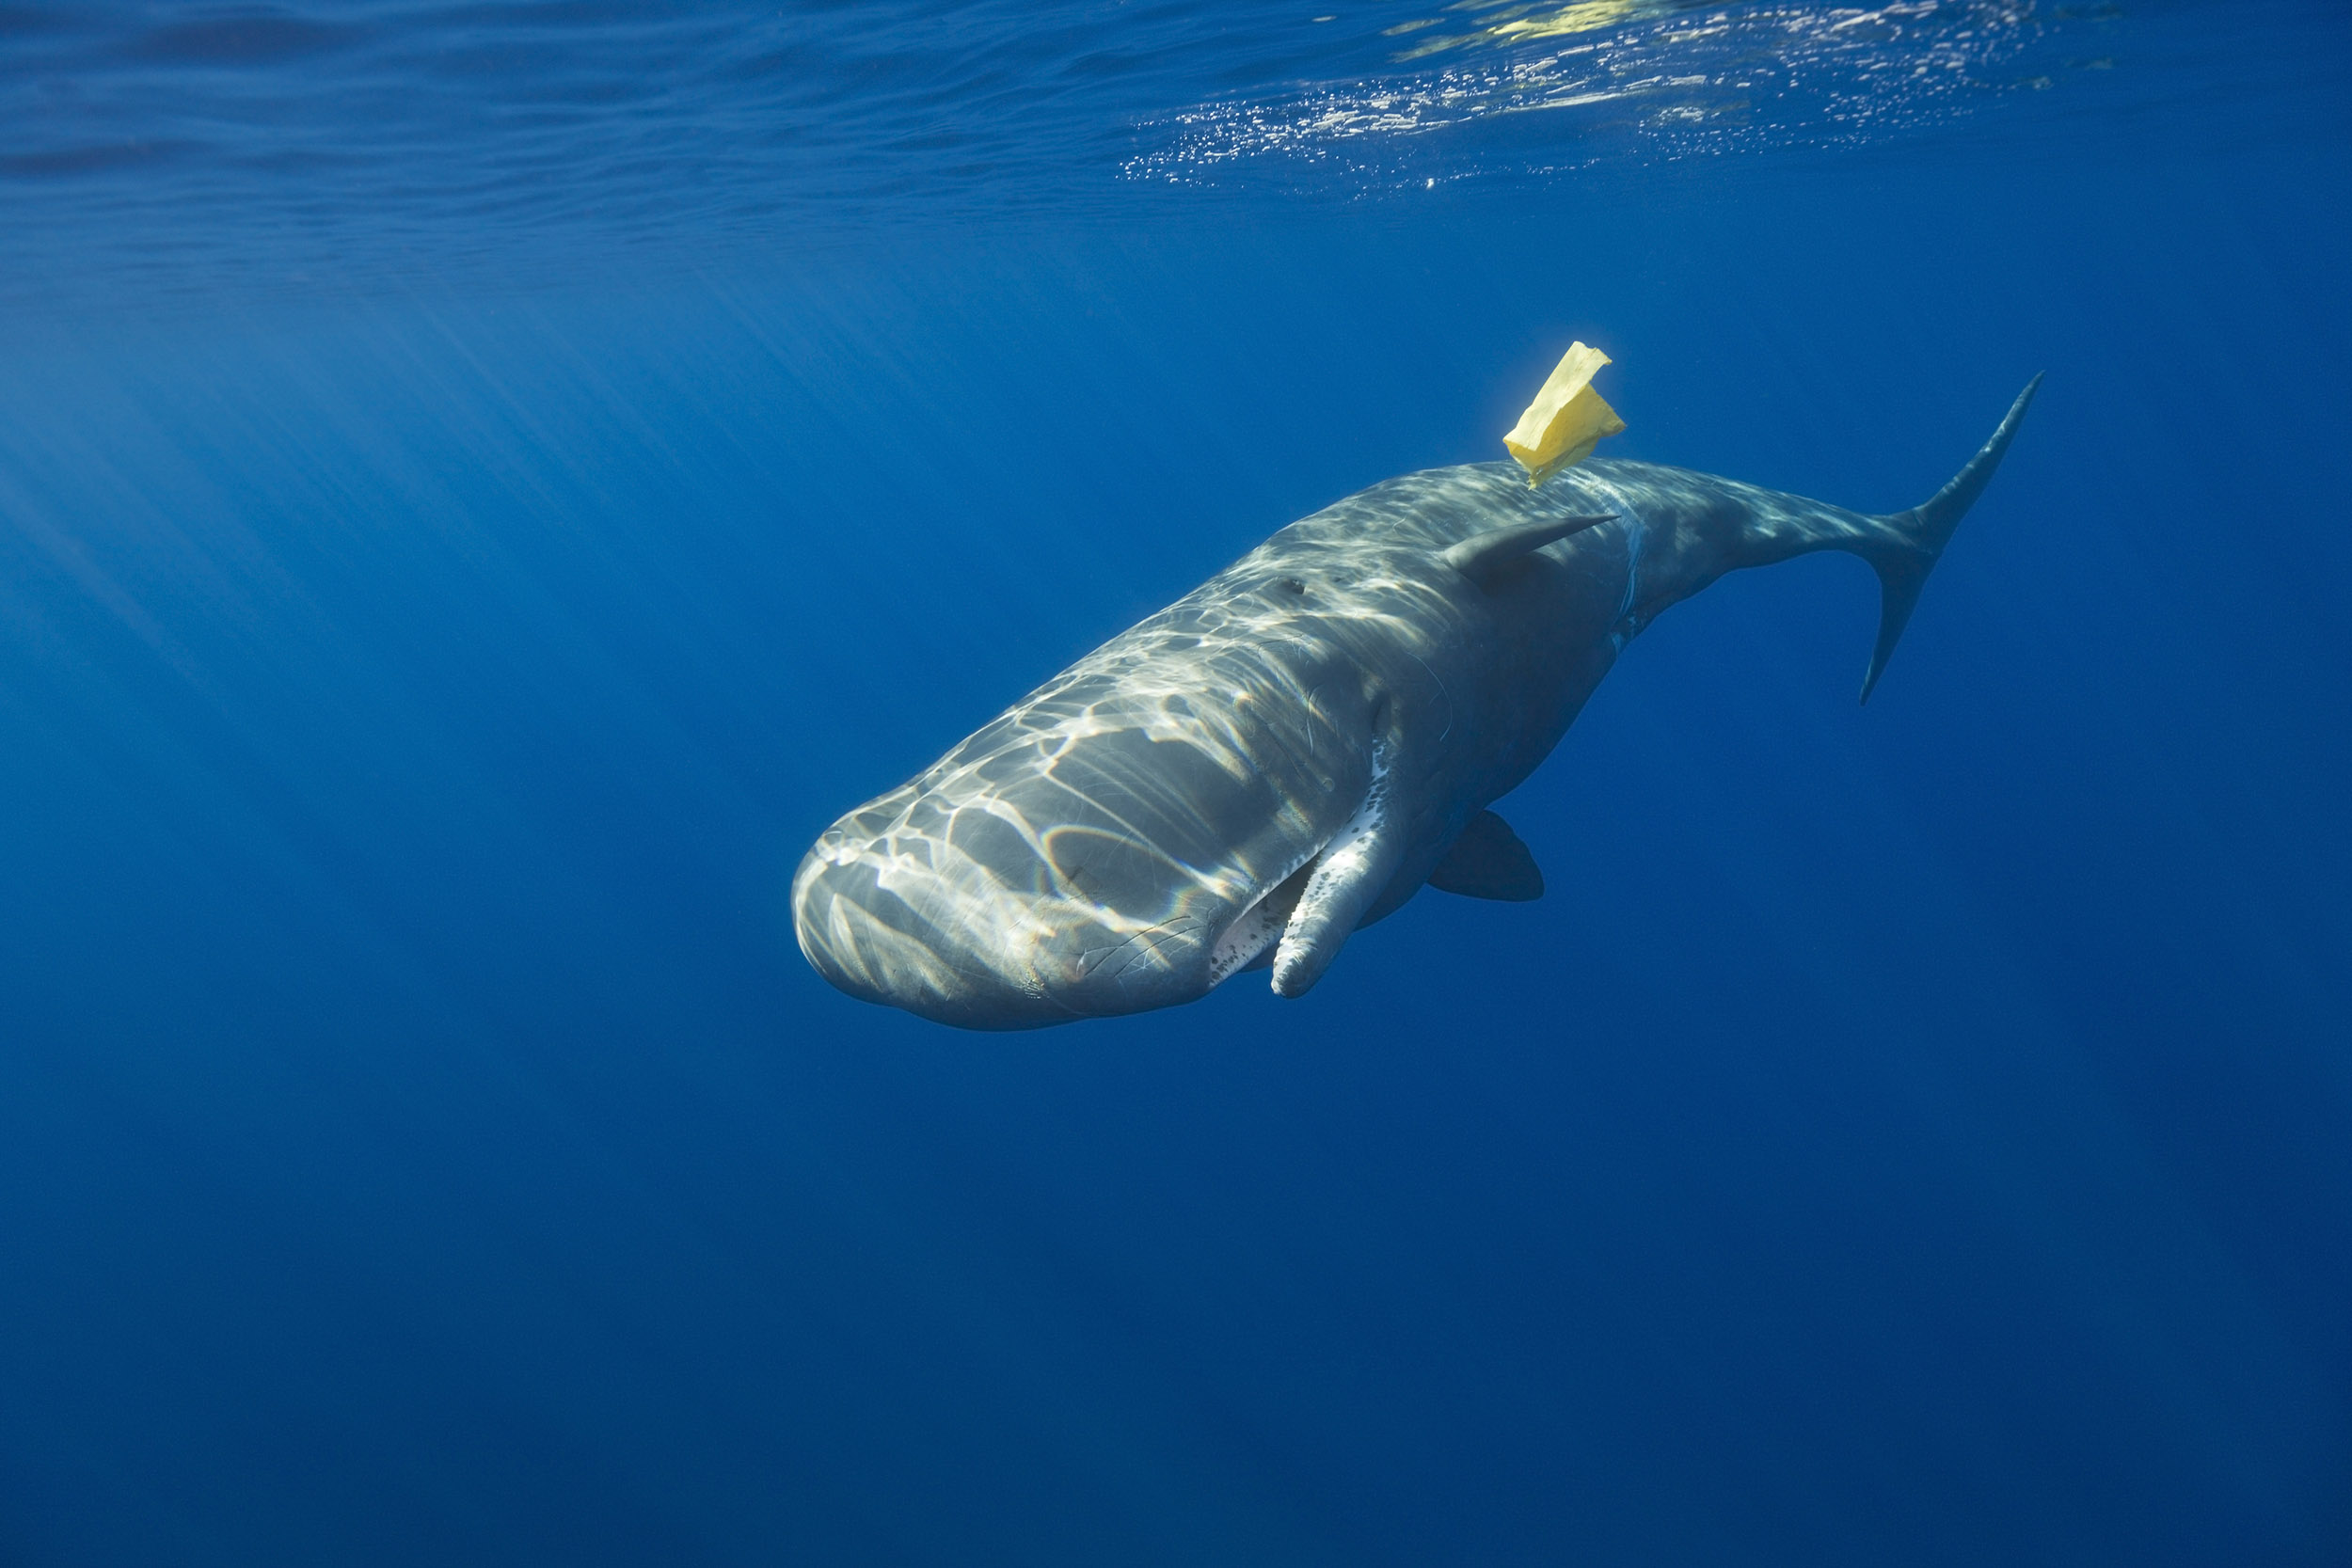 A whale with plastic waste under the water